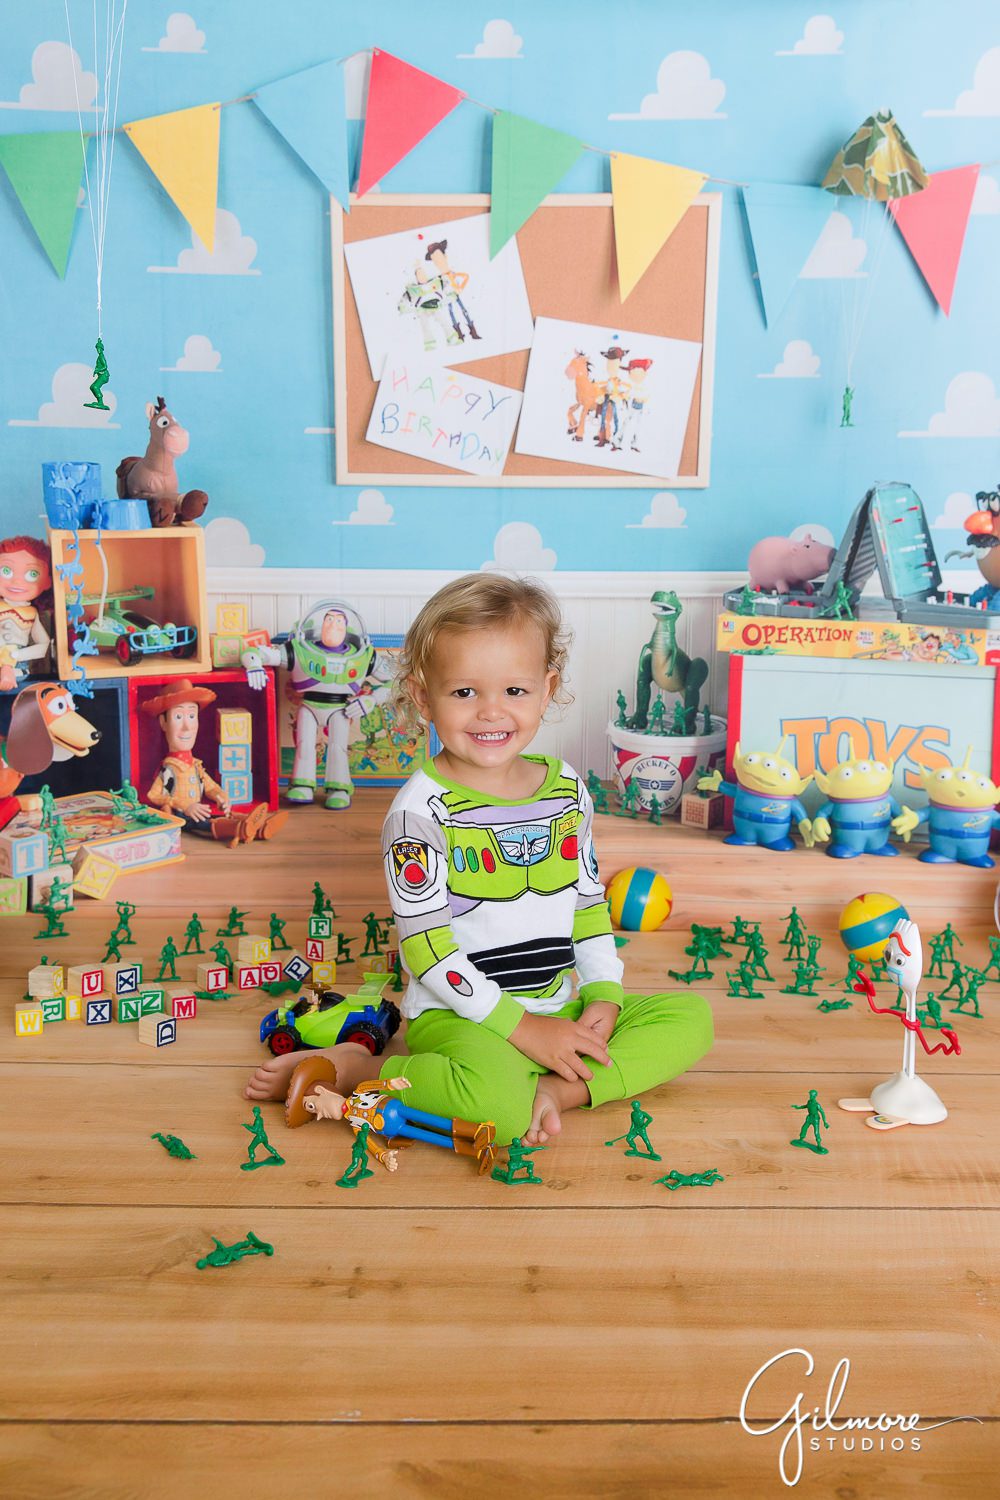 Toy Story Mini Sessions, buzz lightyear, party, background, themed session, Woody